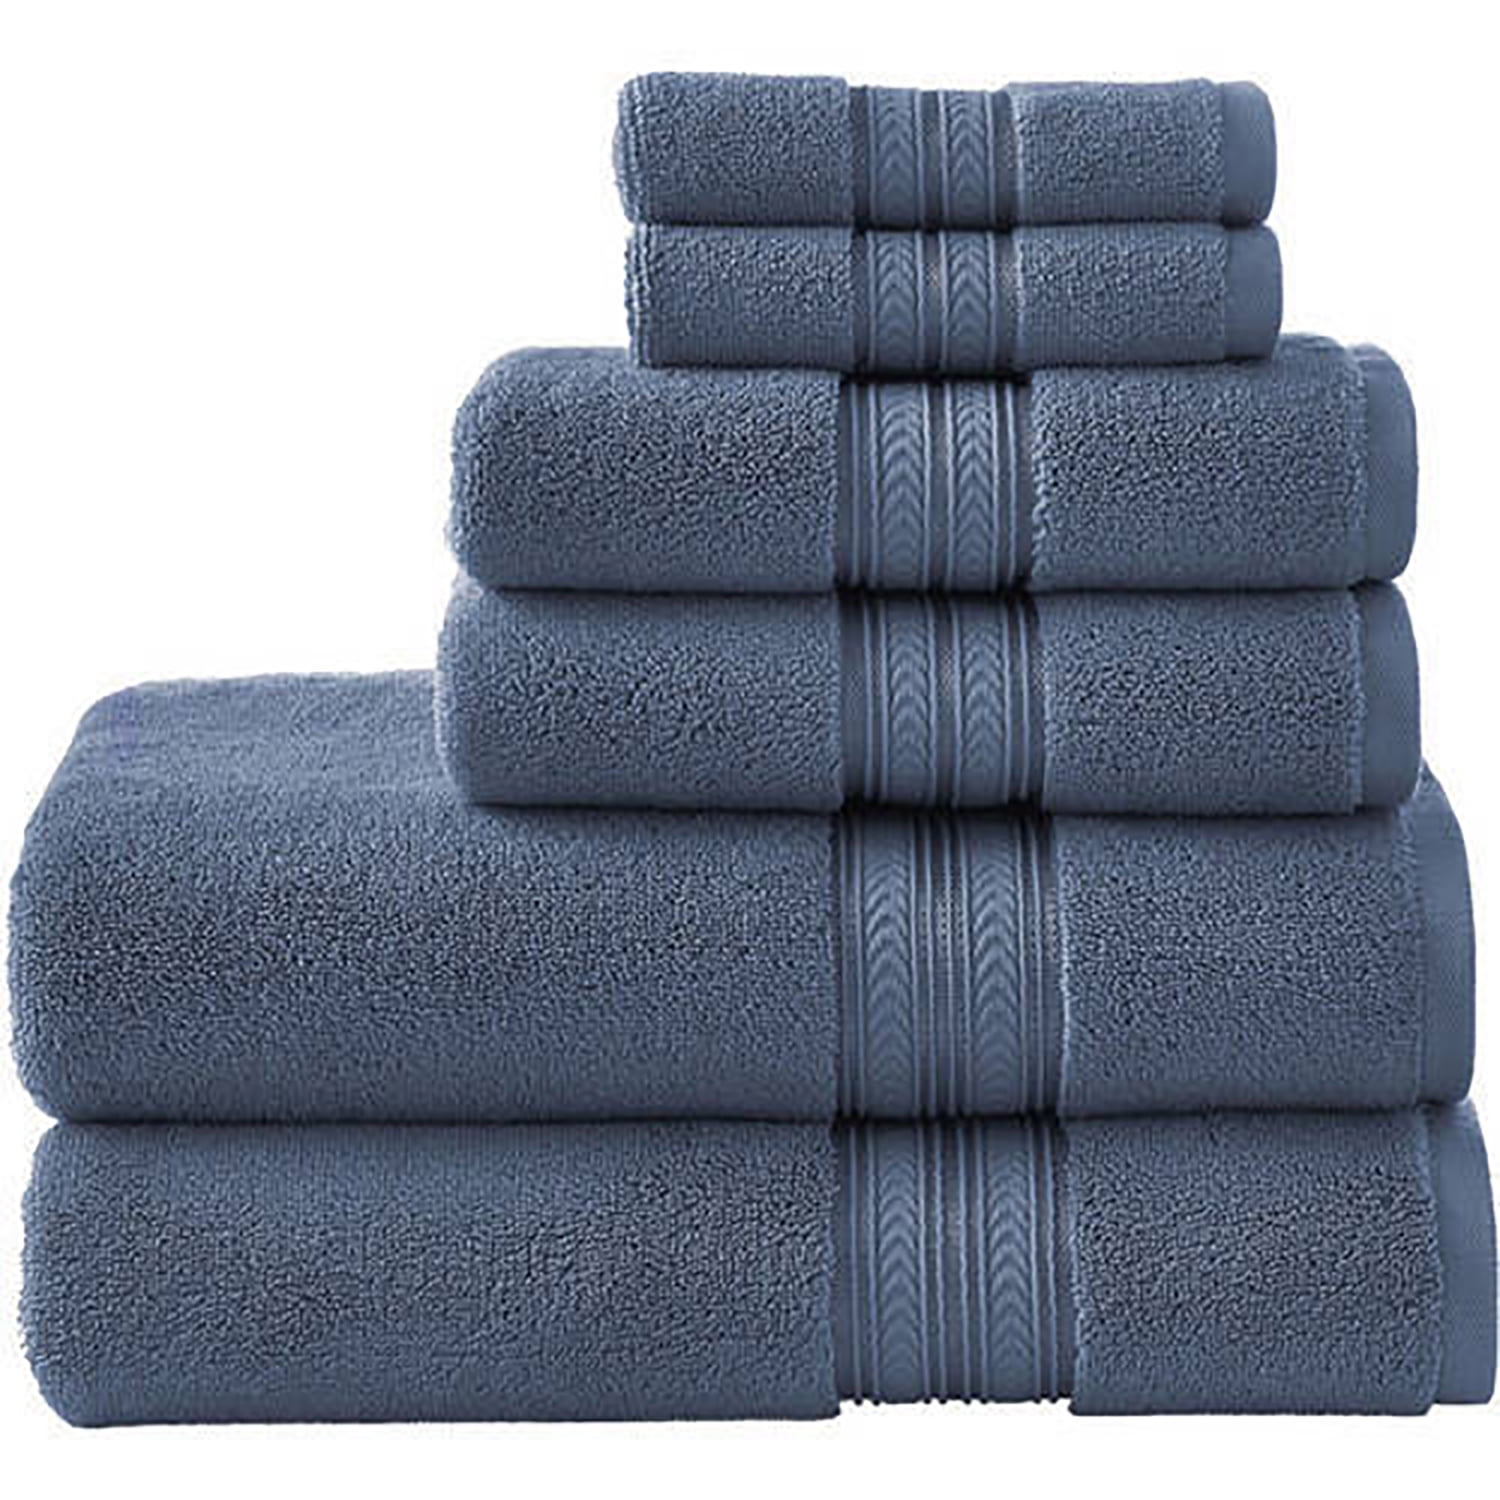 Frugal Hotspot - These distinctive-looking All-Clad Kitchen Towels from  Costco are such a good, thick quality towel. Plus, it's on sale at select  Costco locations through April 11, 2021. For more info->